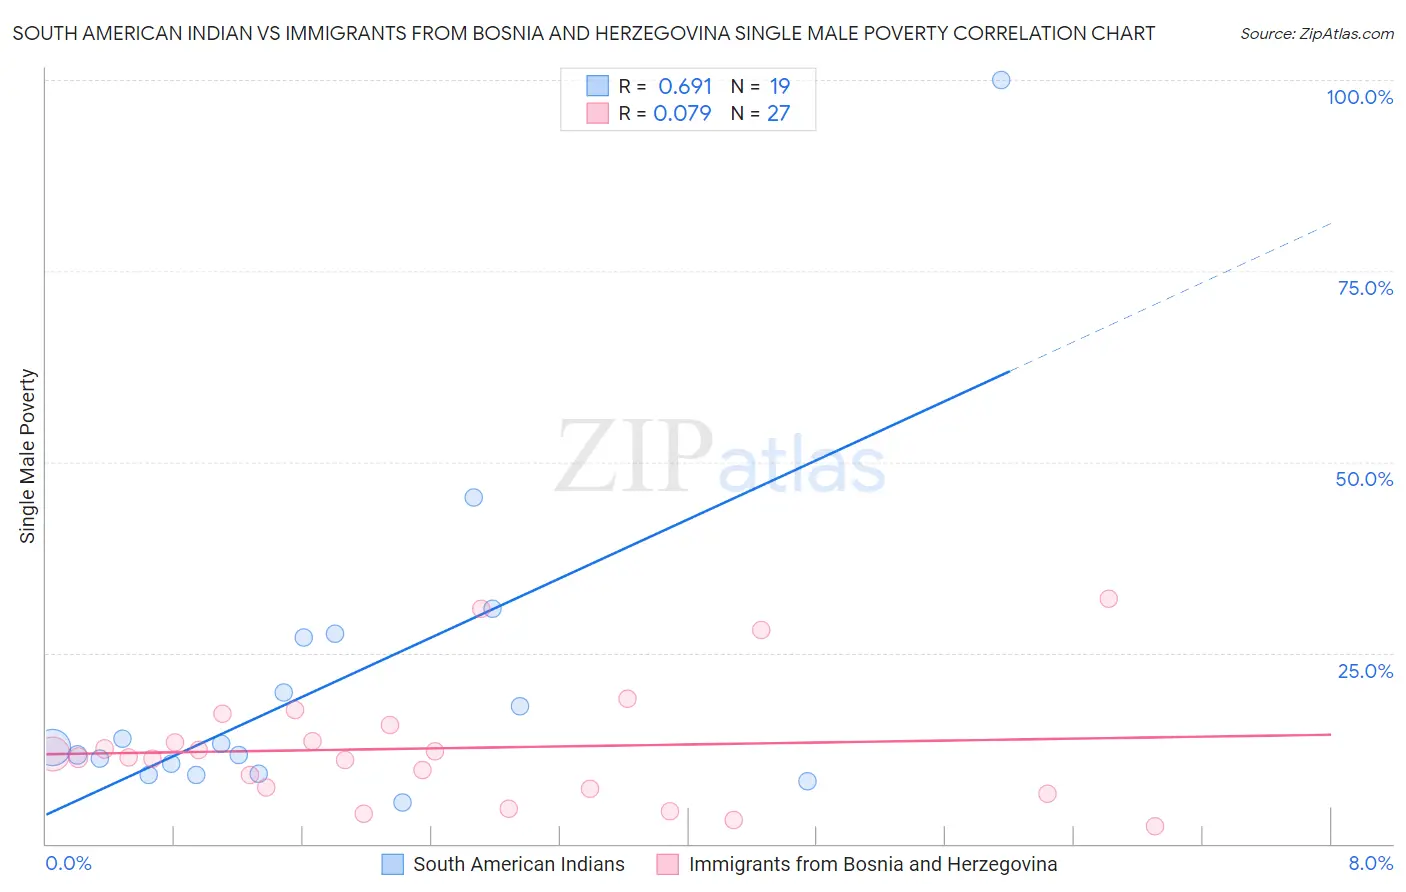 South American Indian vs Immigrants from Bosnia and Herzegovina Single Male Poverty